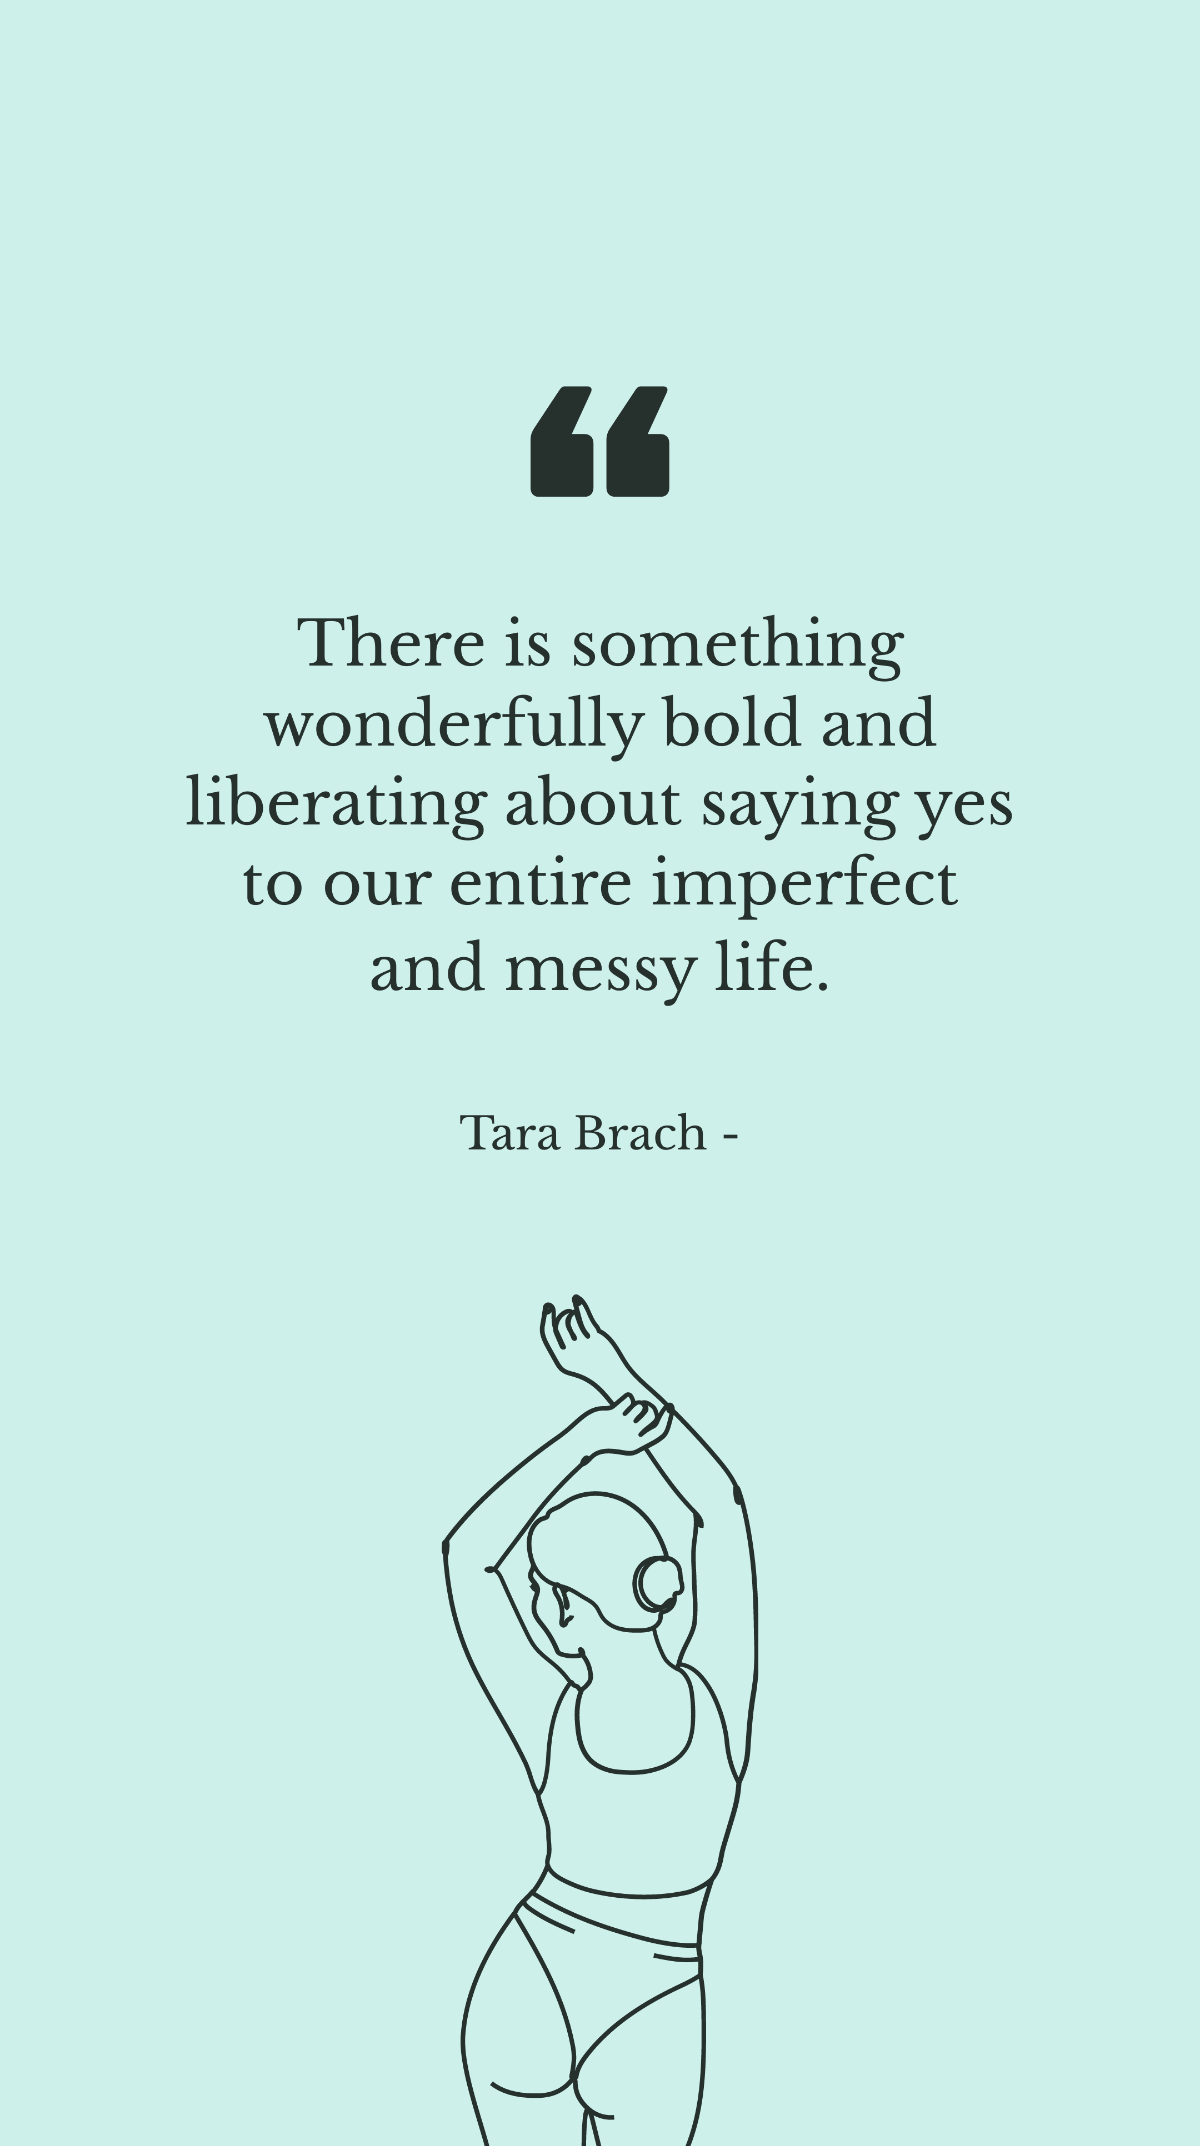 Tara Brach - There is something wonderfully bold and liberating about saying yes to our entire imperfect and messy life. Template